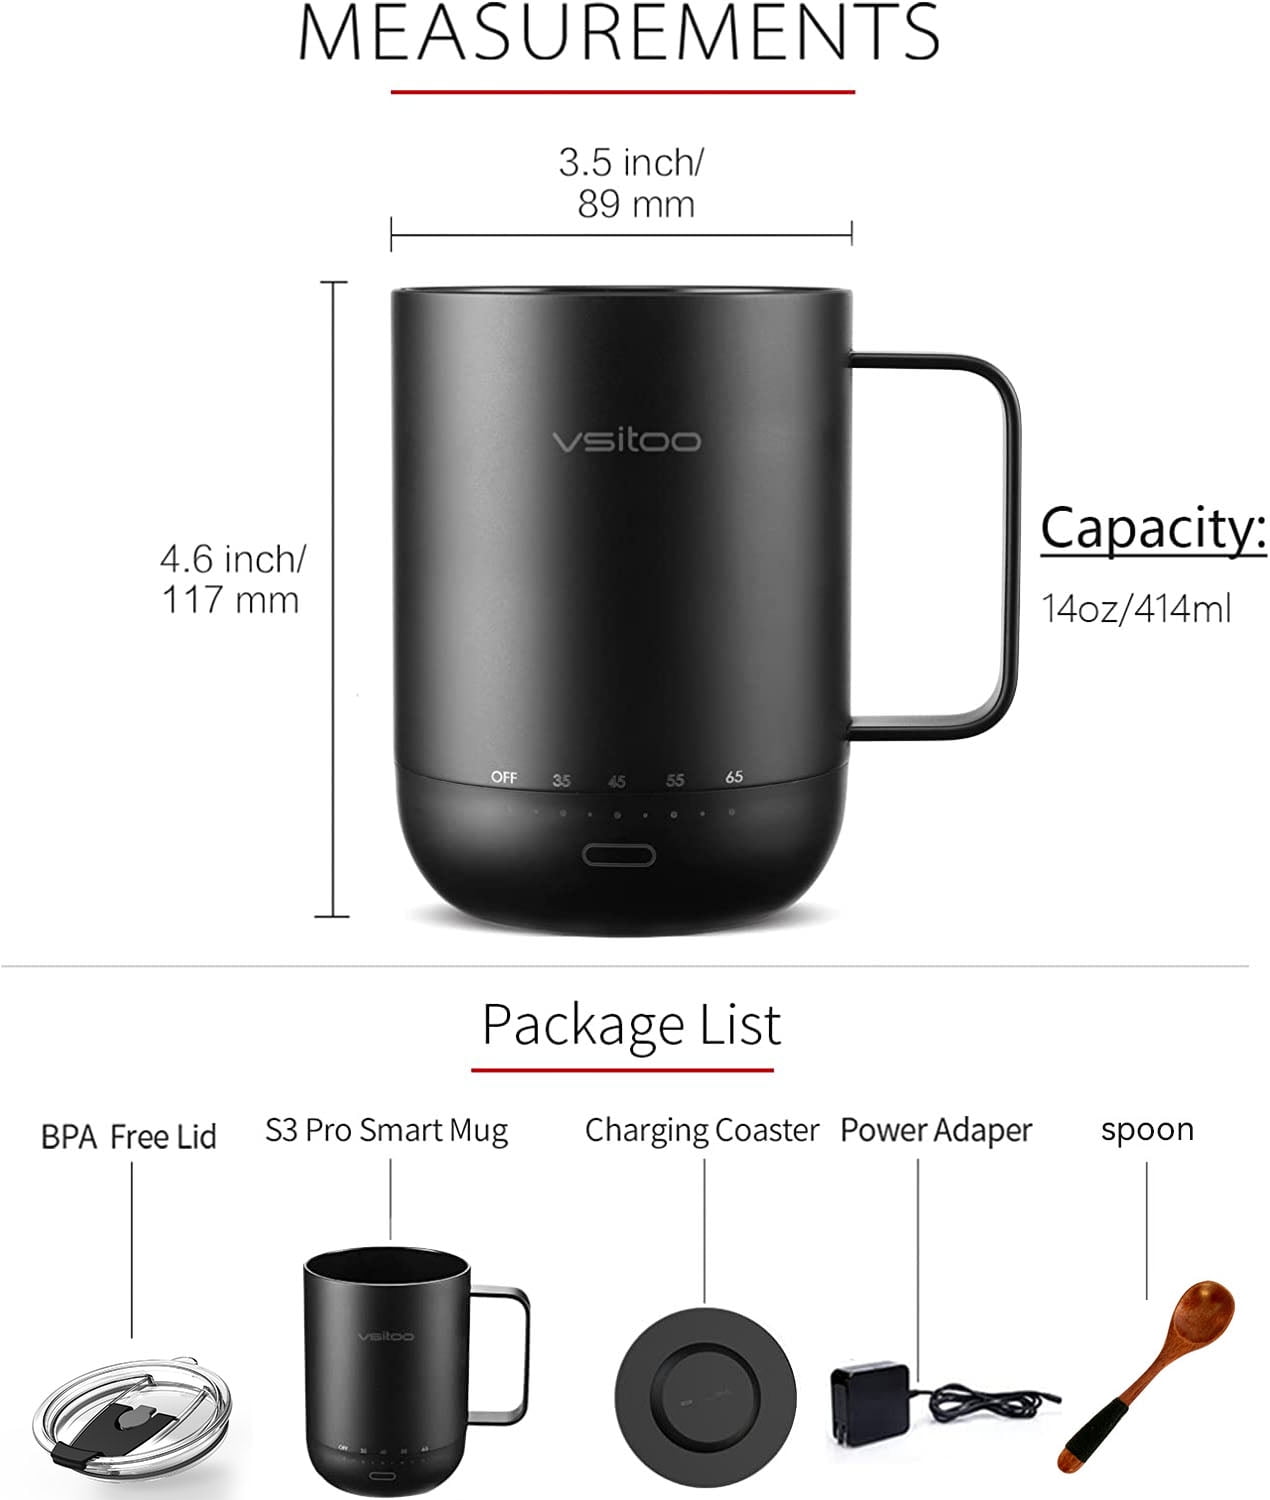 vsitoo S3pro Temperature Control Smart Mug 2 with Lid, Self Heating Coffee  Mug 14 oz, 90 Min Battery Life - APP & Manual Controlled Heated Coffee Mug  - Improved Design - Gifts for Coffee Lovers 